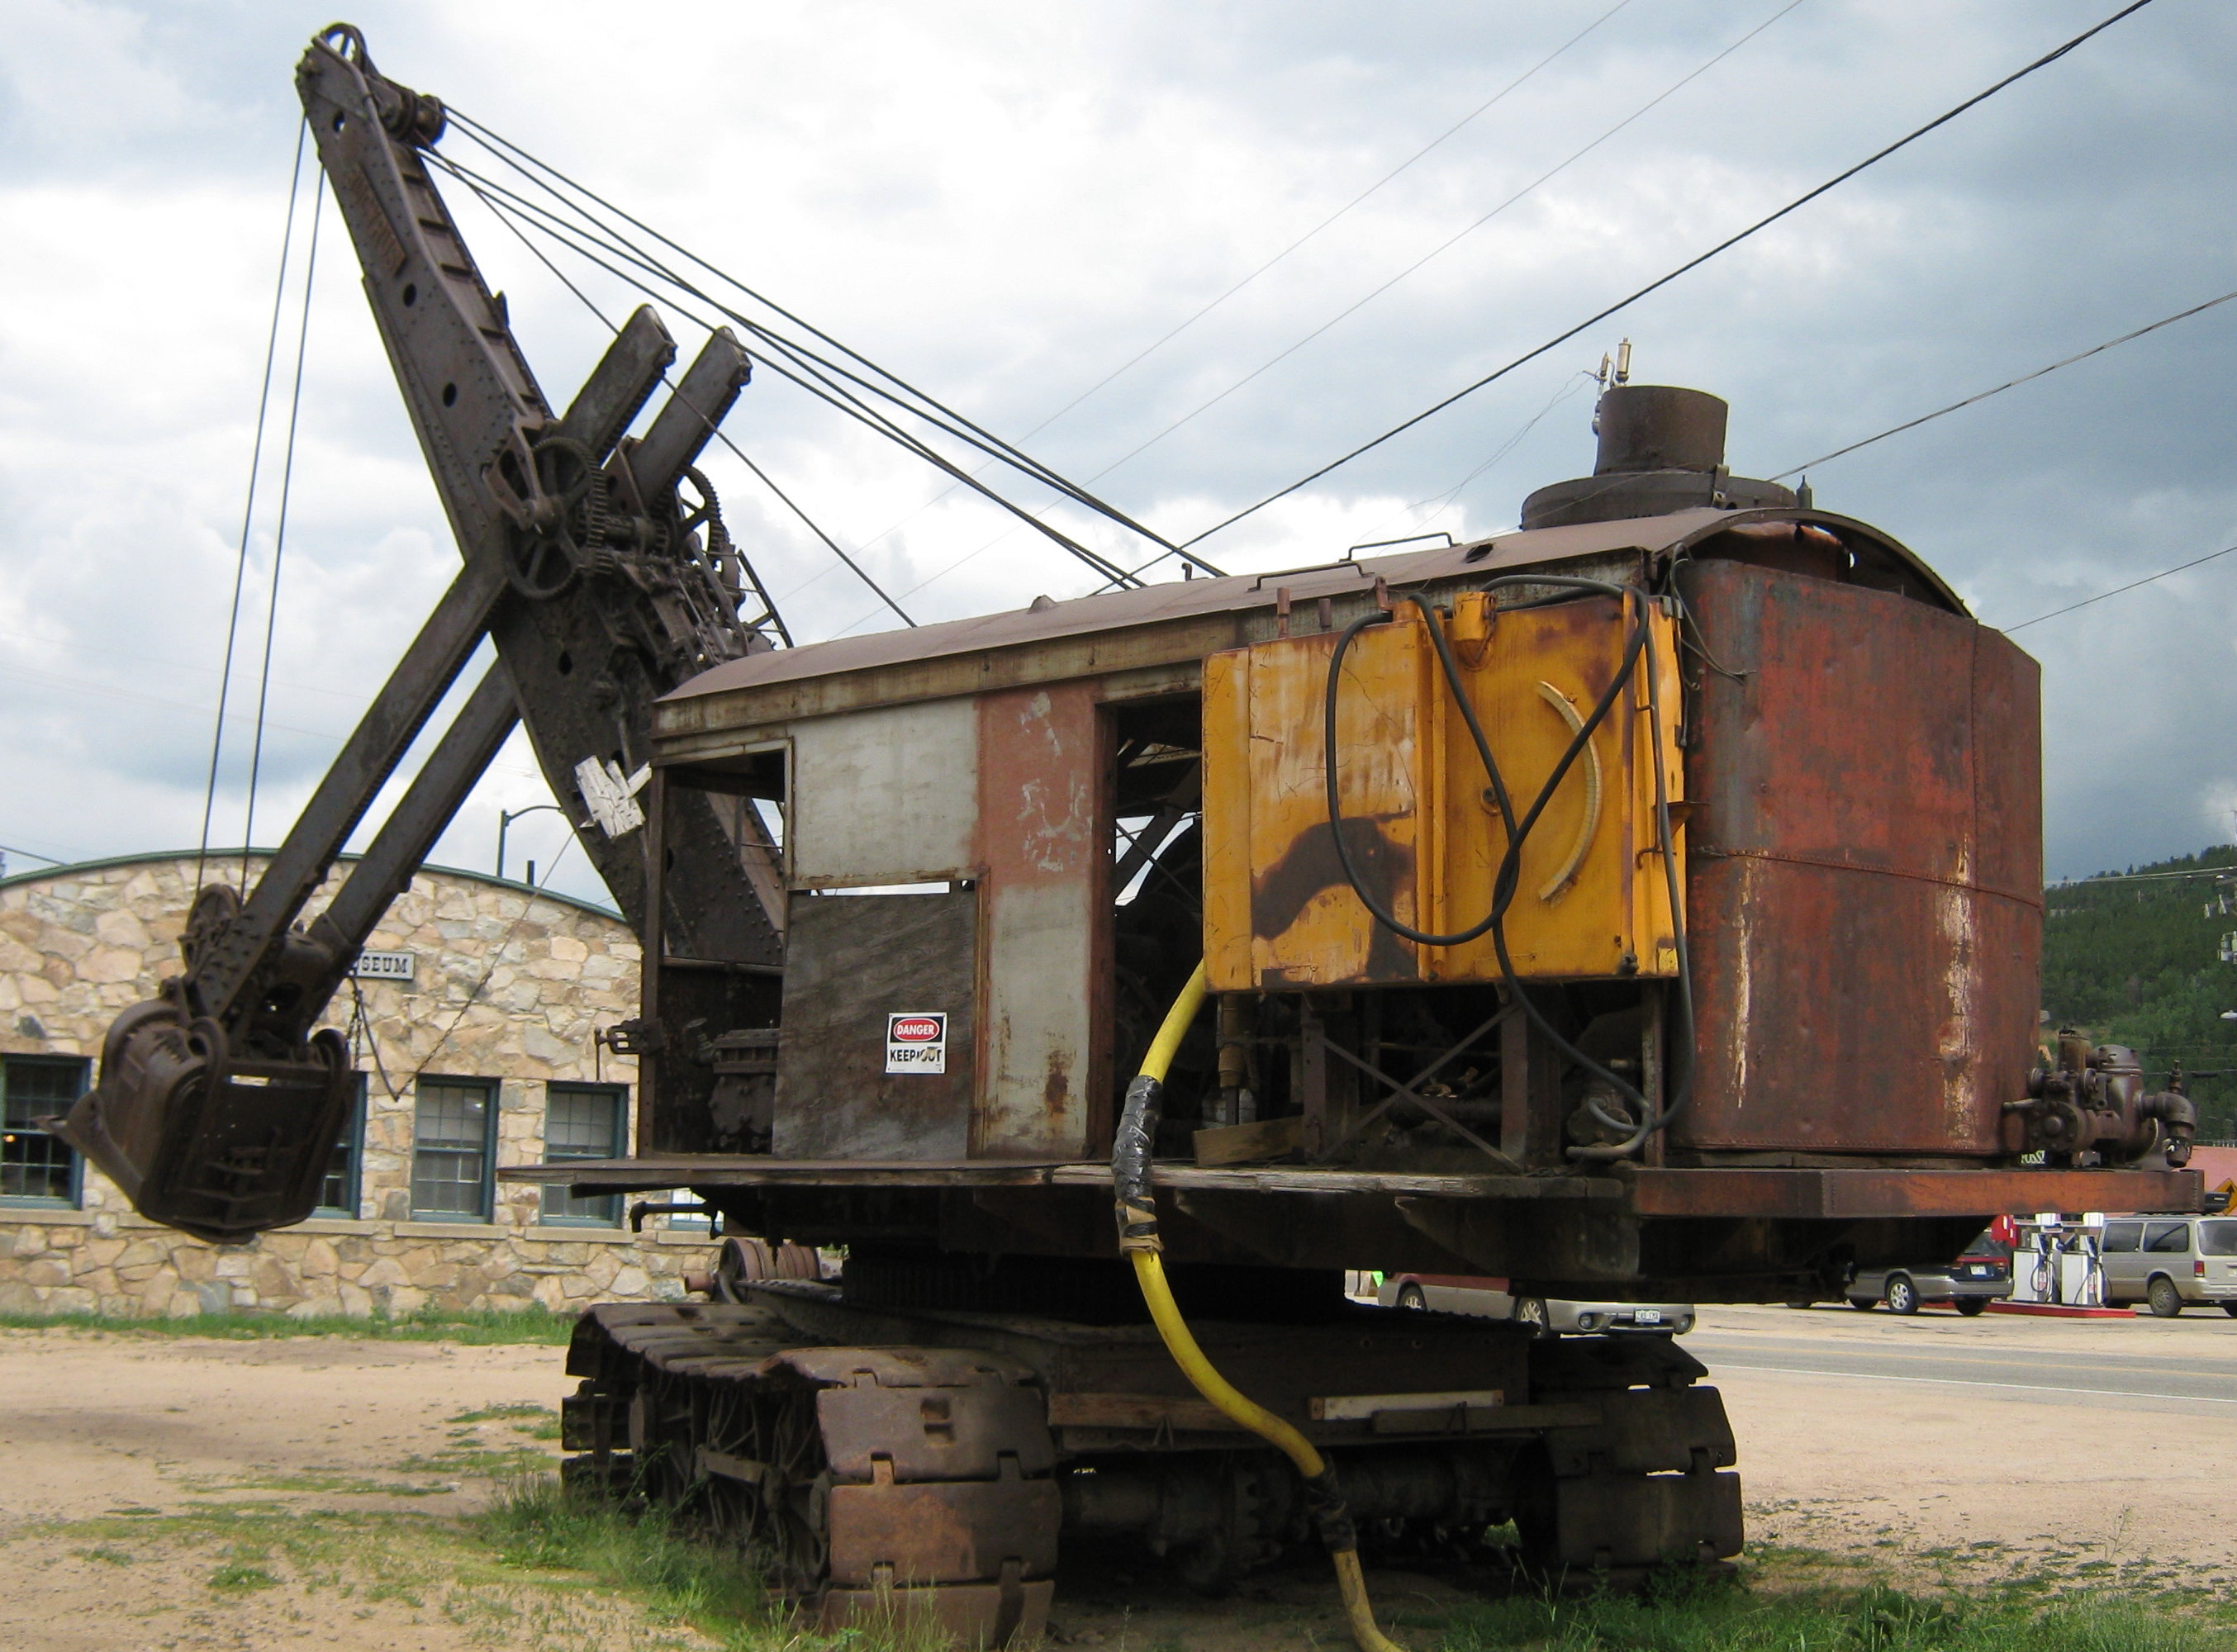 And the steam shovel фото 104